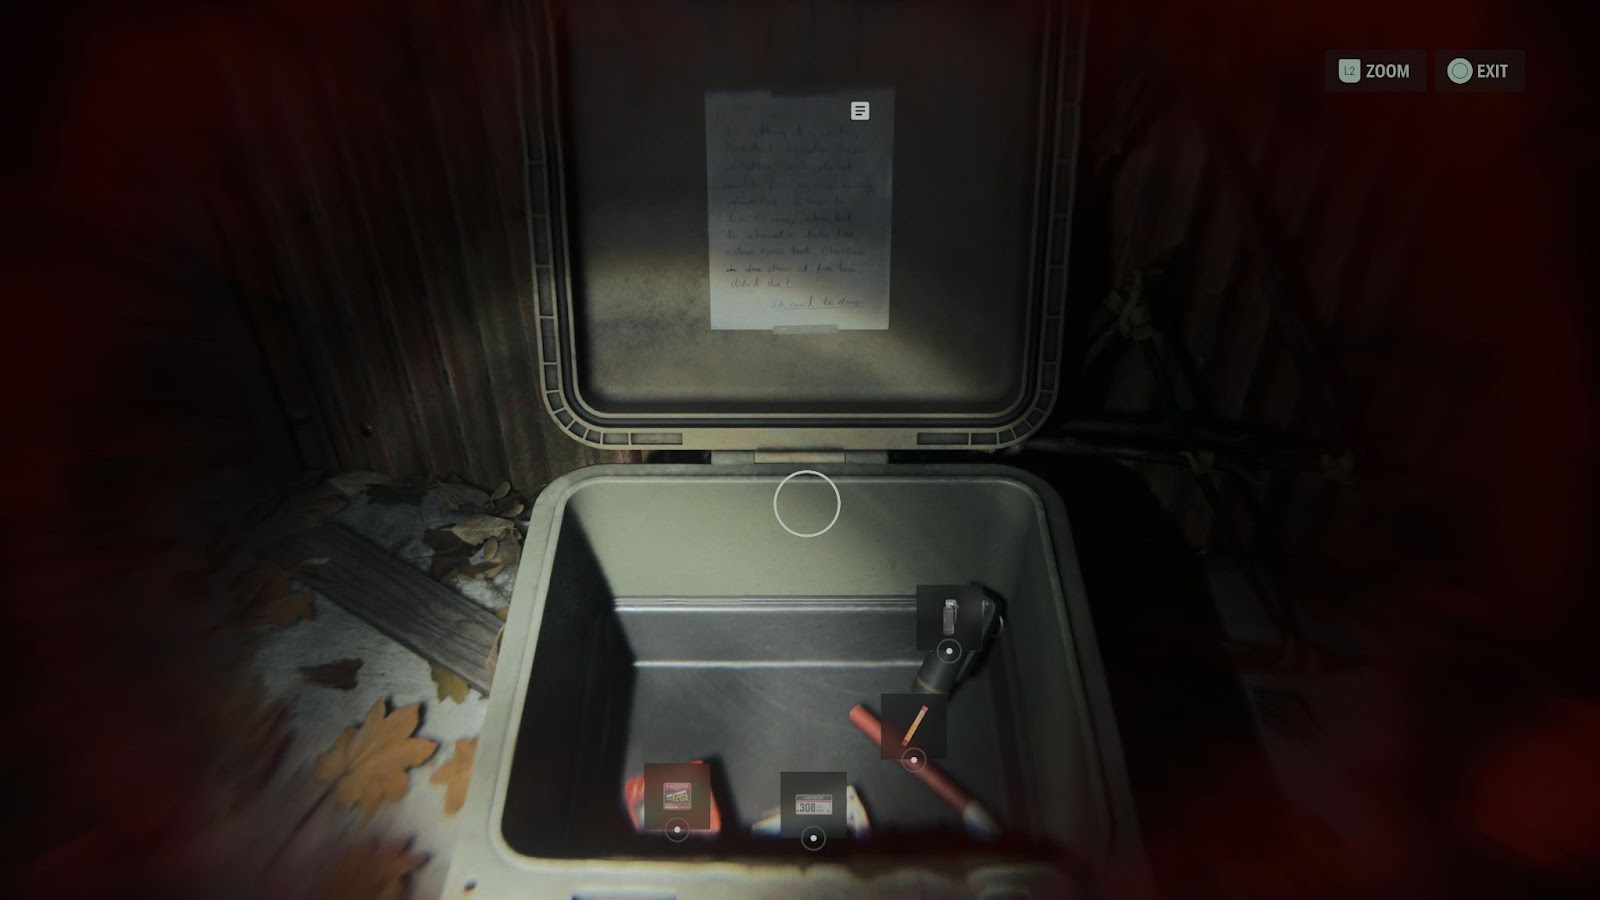 An in game screenshot of the Kalevala Workshop cult stash from Alan Wake 2